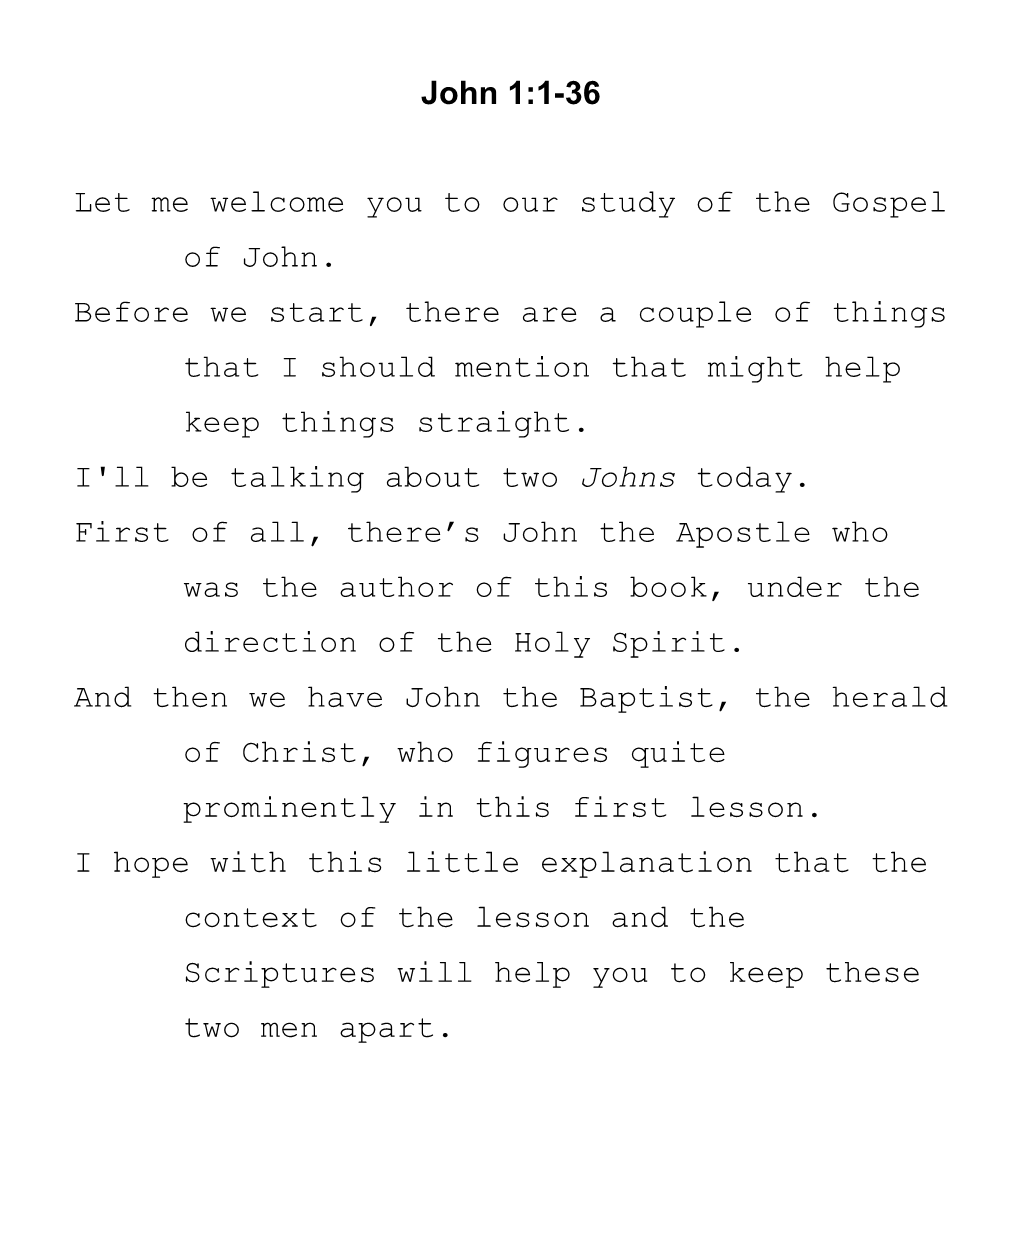 Let Me Welcome You to Our Study of the Gospel of John